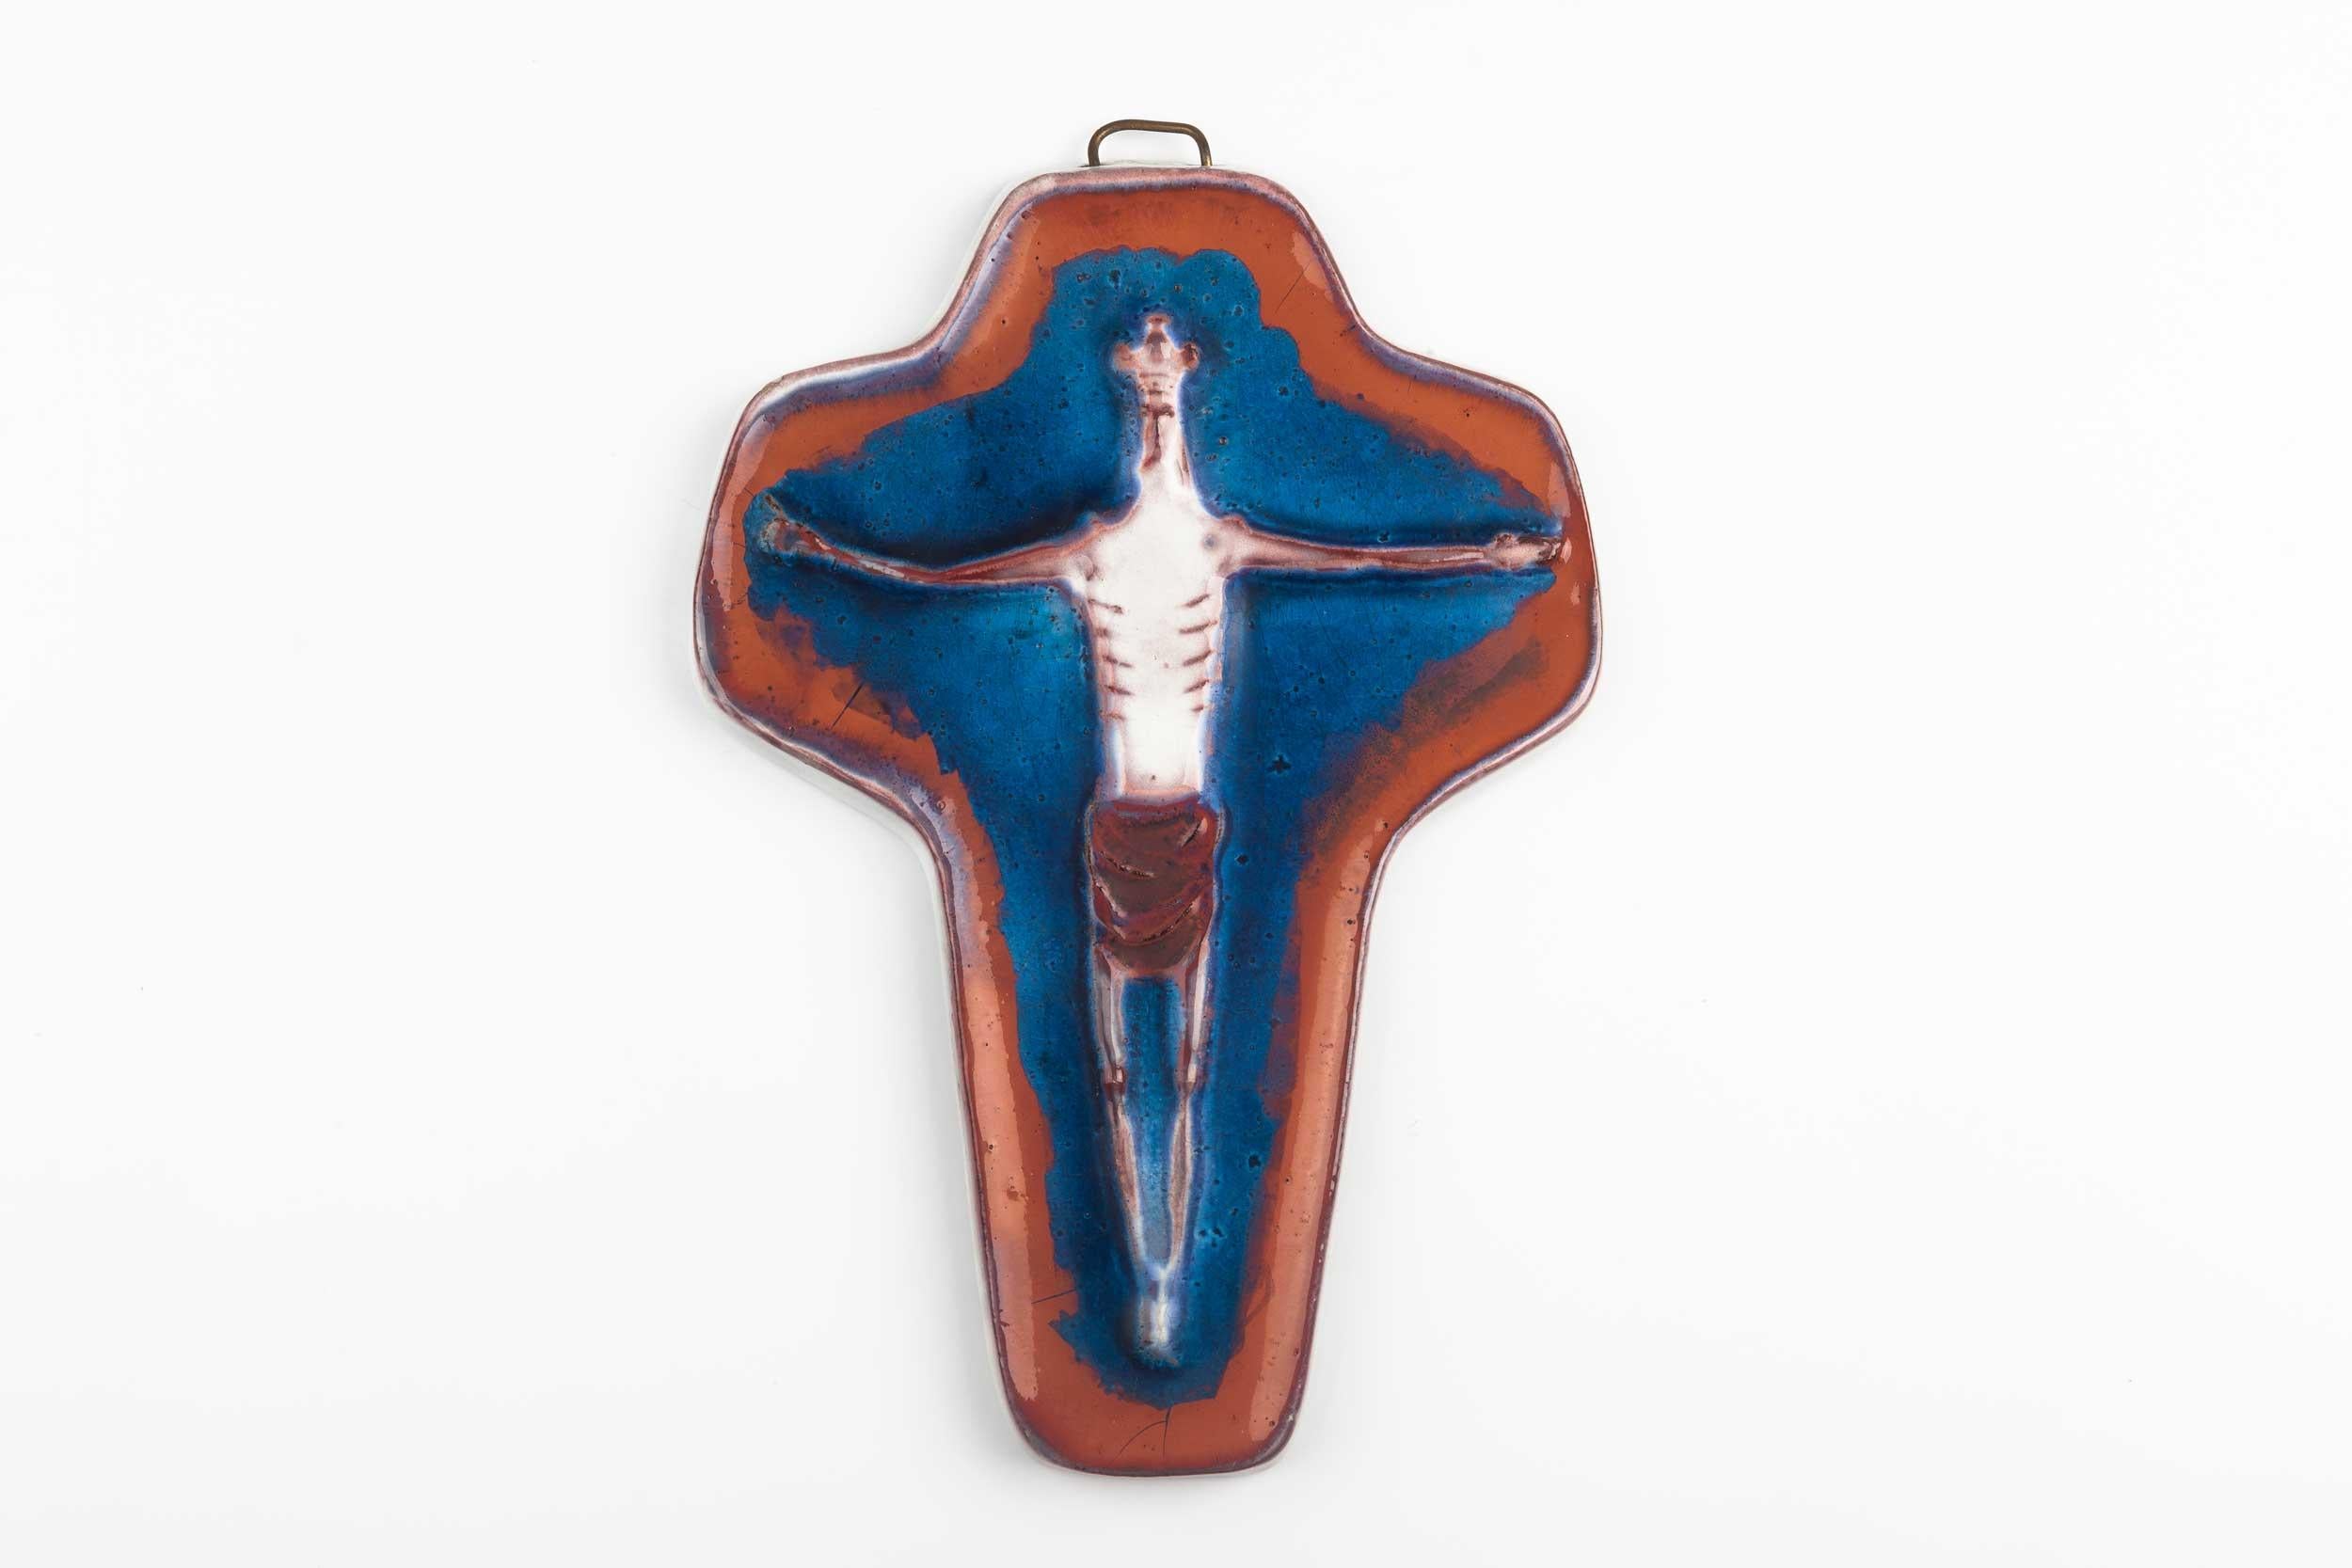 Mesmerizing midcentury European wall cross hand painted in white, sienna and blue with an abstracted and otherworldly Christ figure. Not your granny's typical cross, but one you could gift her. 

Dimensions
H 9.25 in. x W 6.5 in. x D .75 in.
H